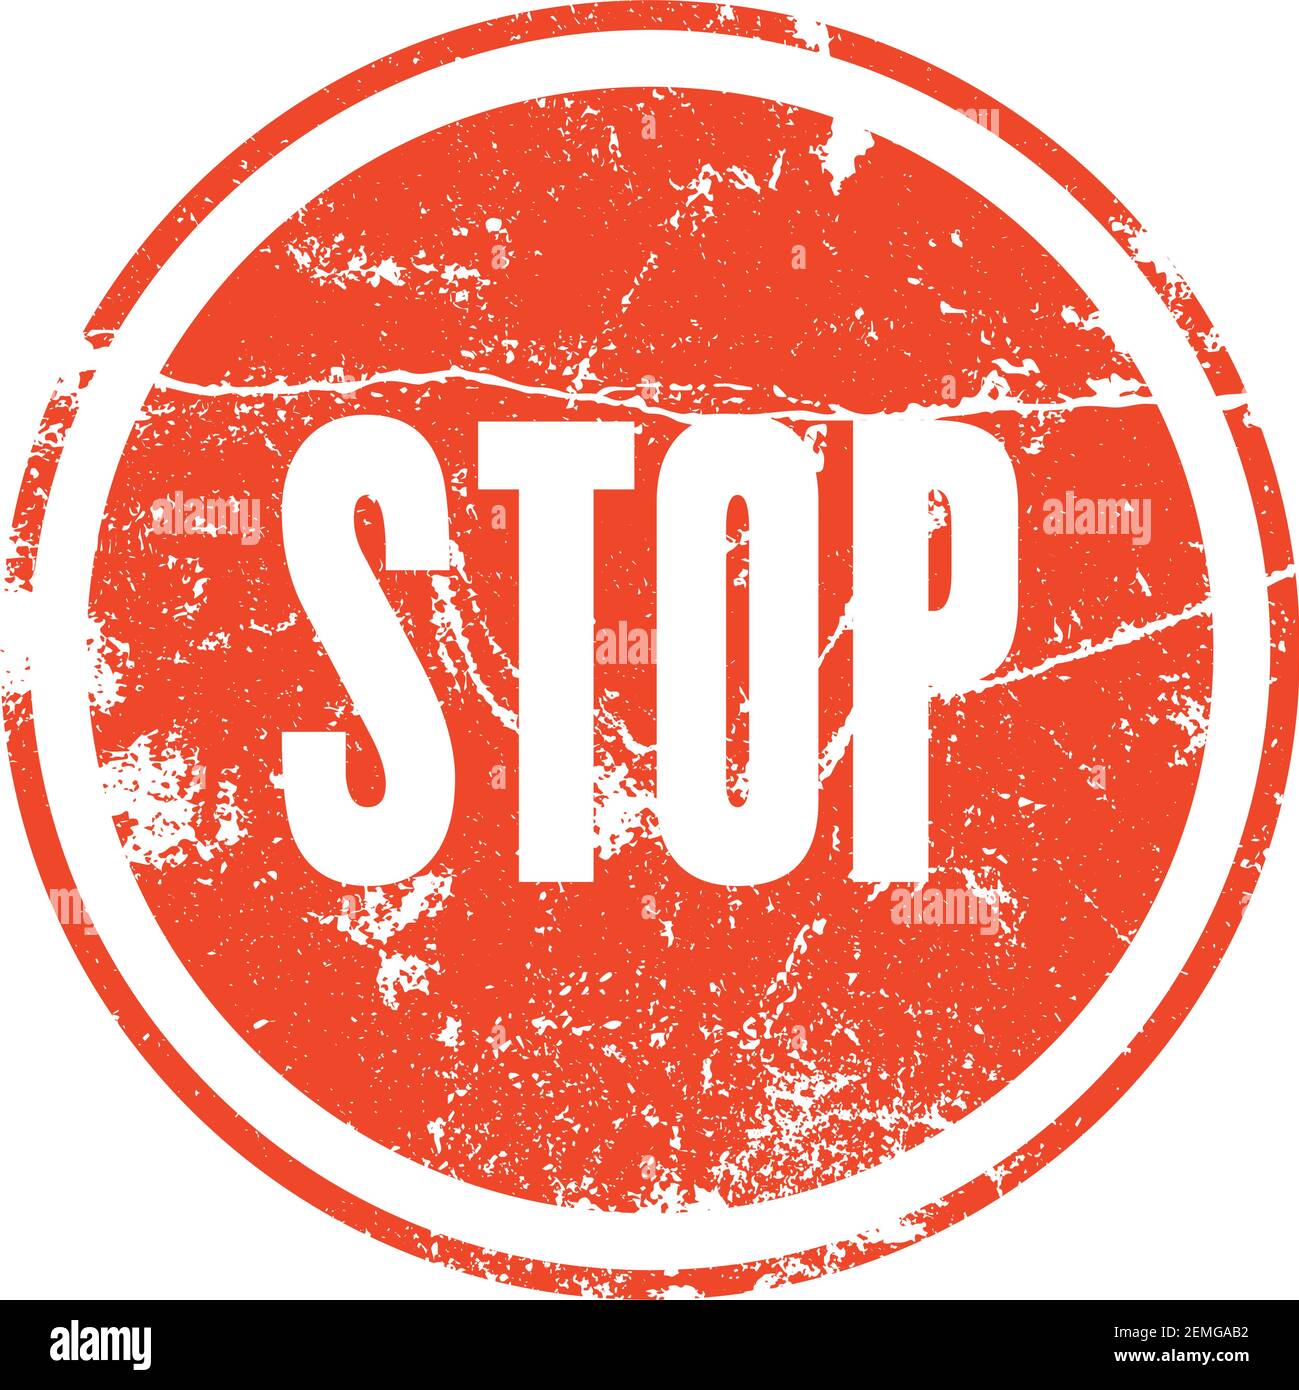 Red rubber stamp with the word stop in grunge style. Road signs vector illustration. Stock Vector